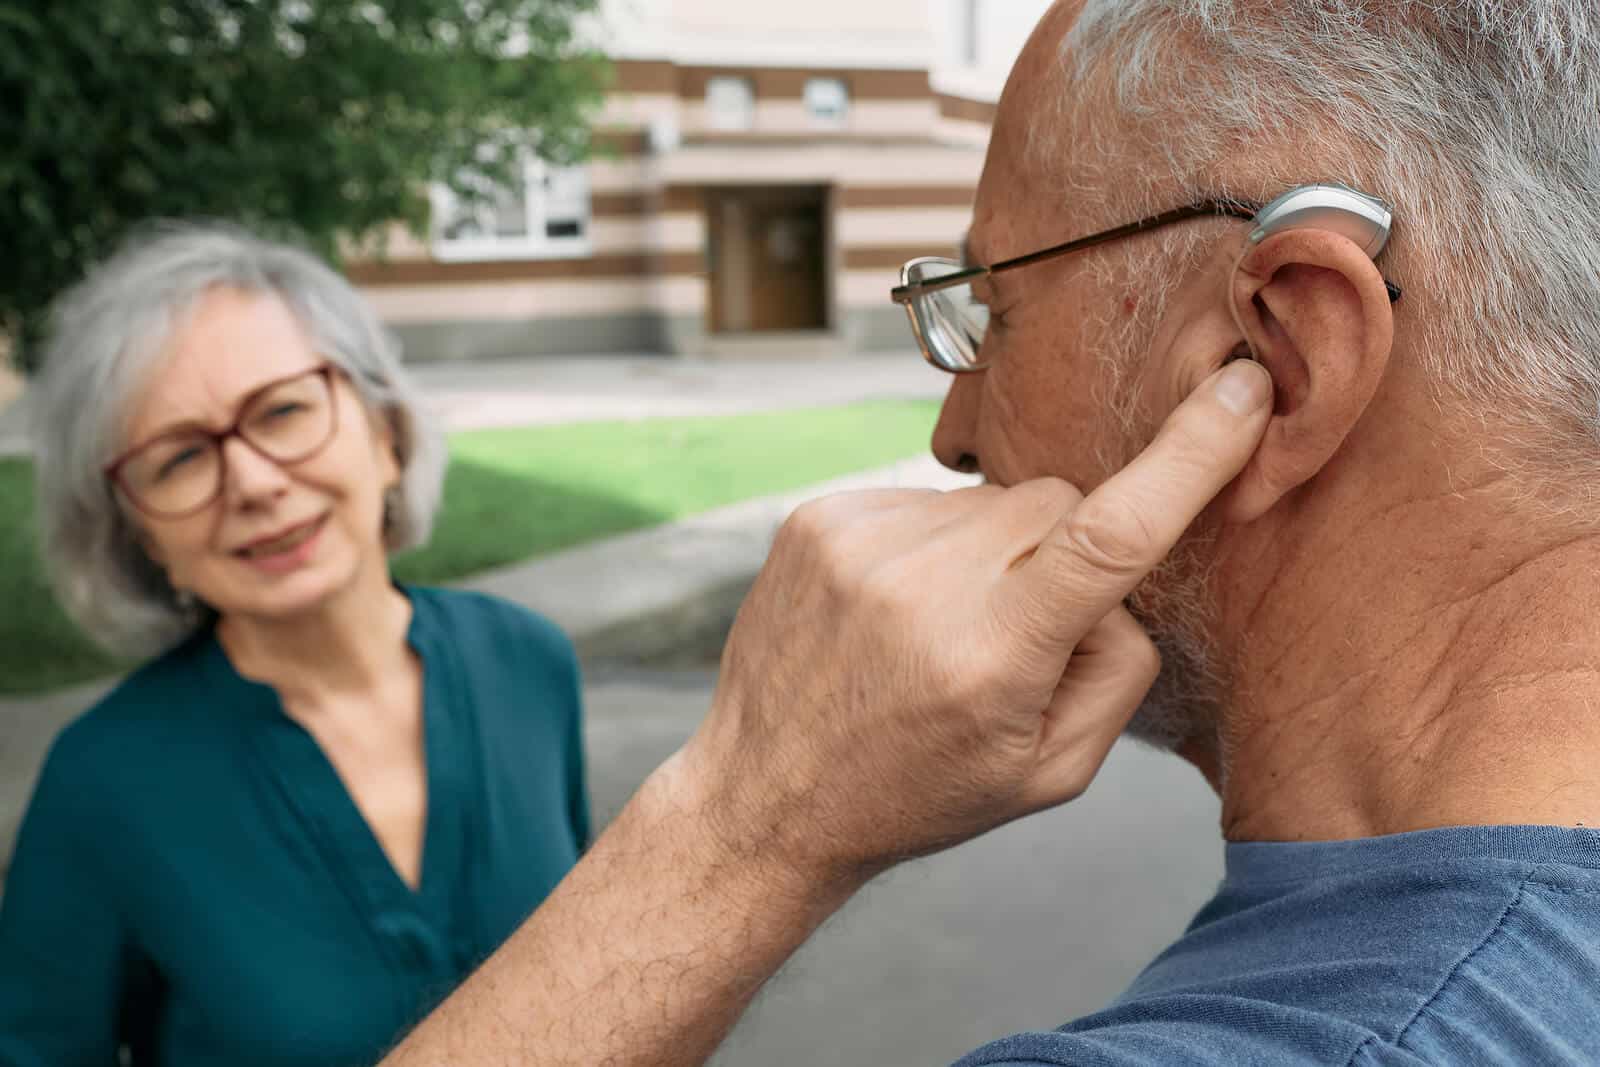 The common hearing aid issues you might encounter